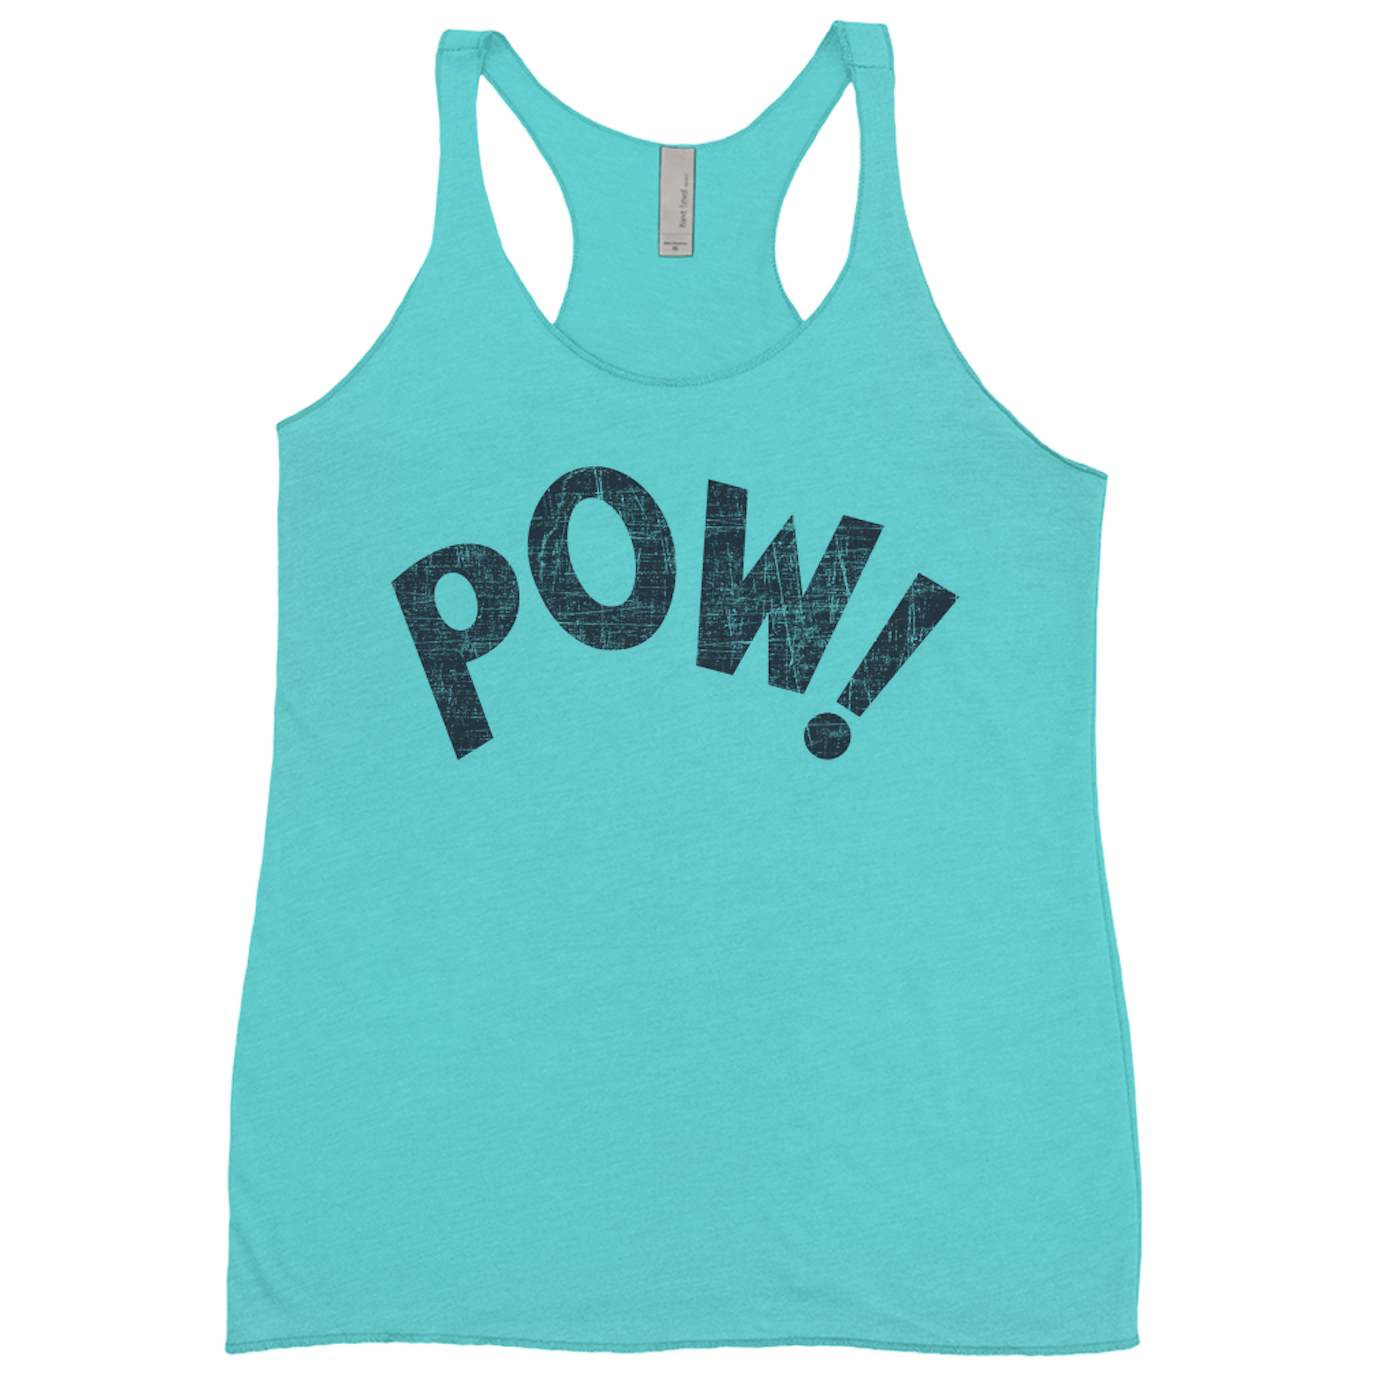 The Who Ladies' Tank Top | POW! Worn By Keith Moon The Who Shirt